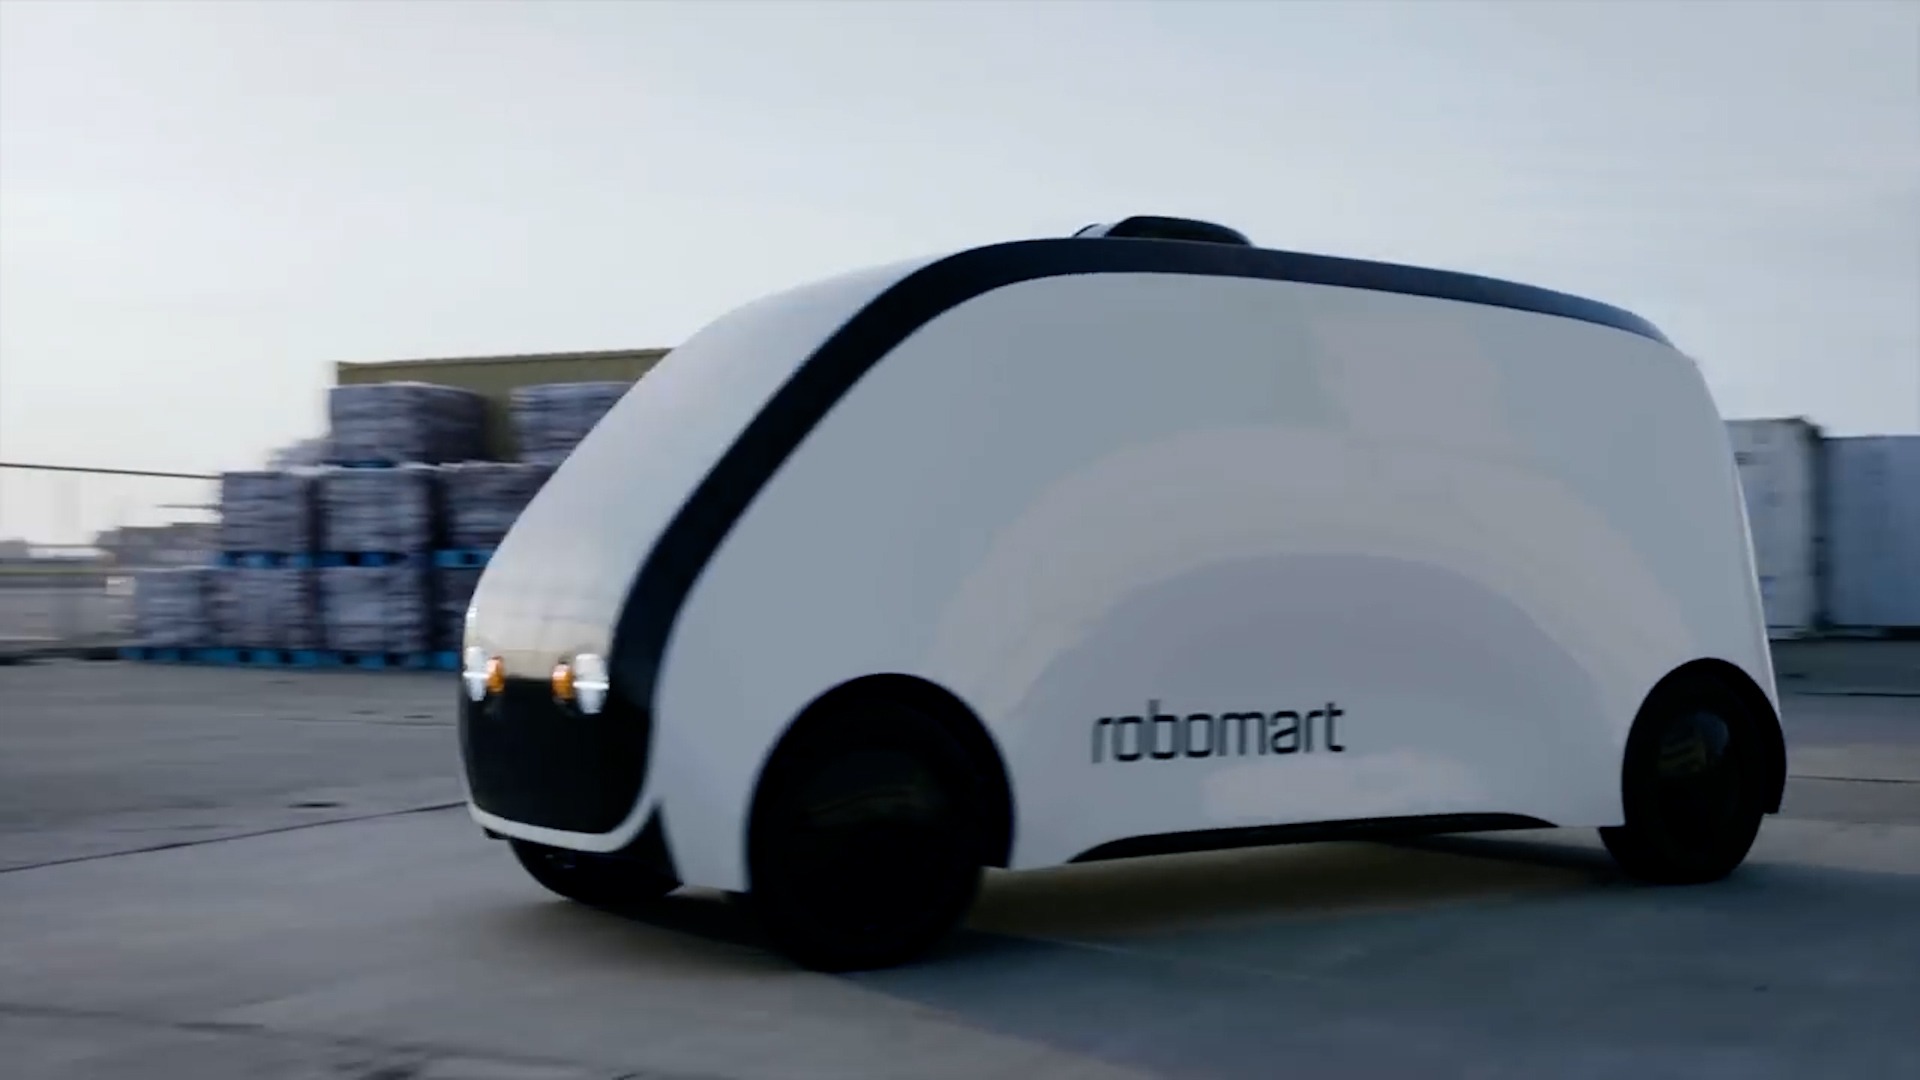 Robomart Is The Driverless Minimart Co-Founded by Tigran Shahverdyan